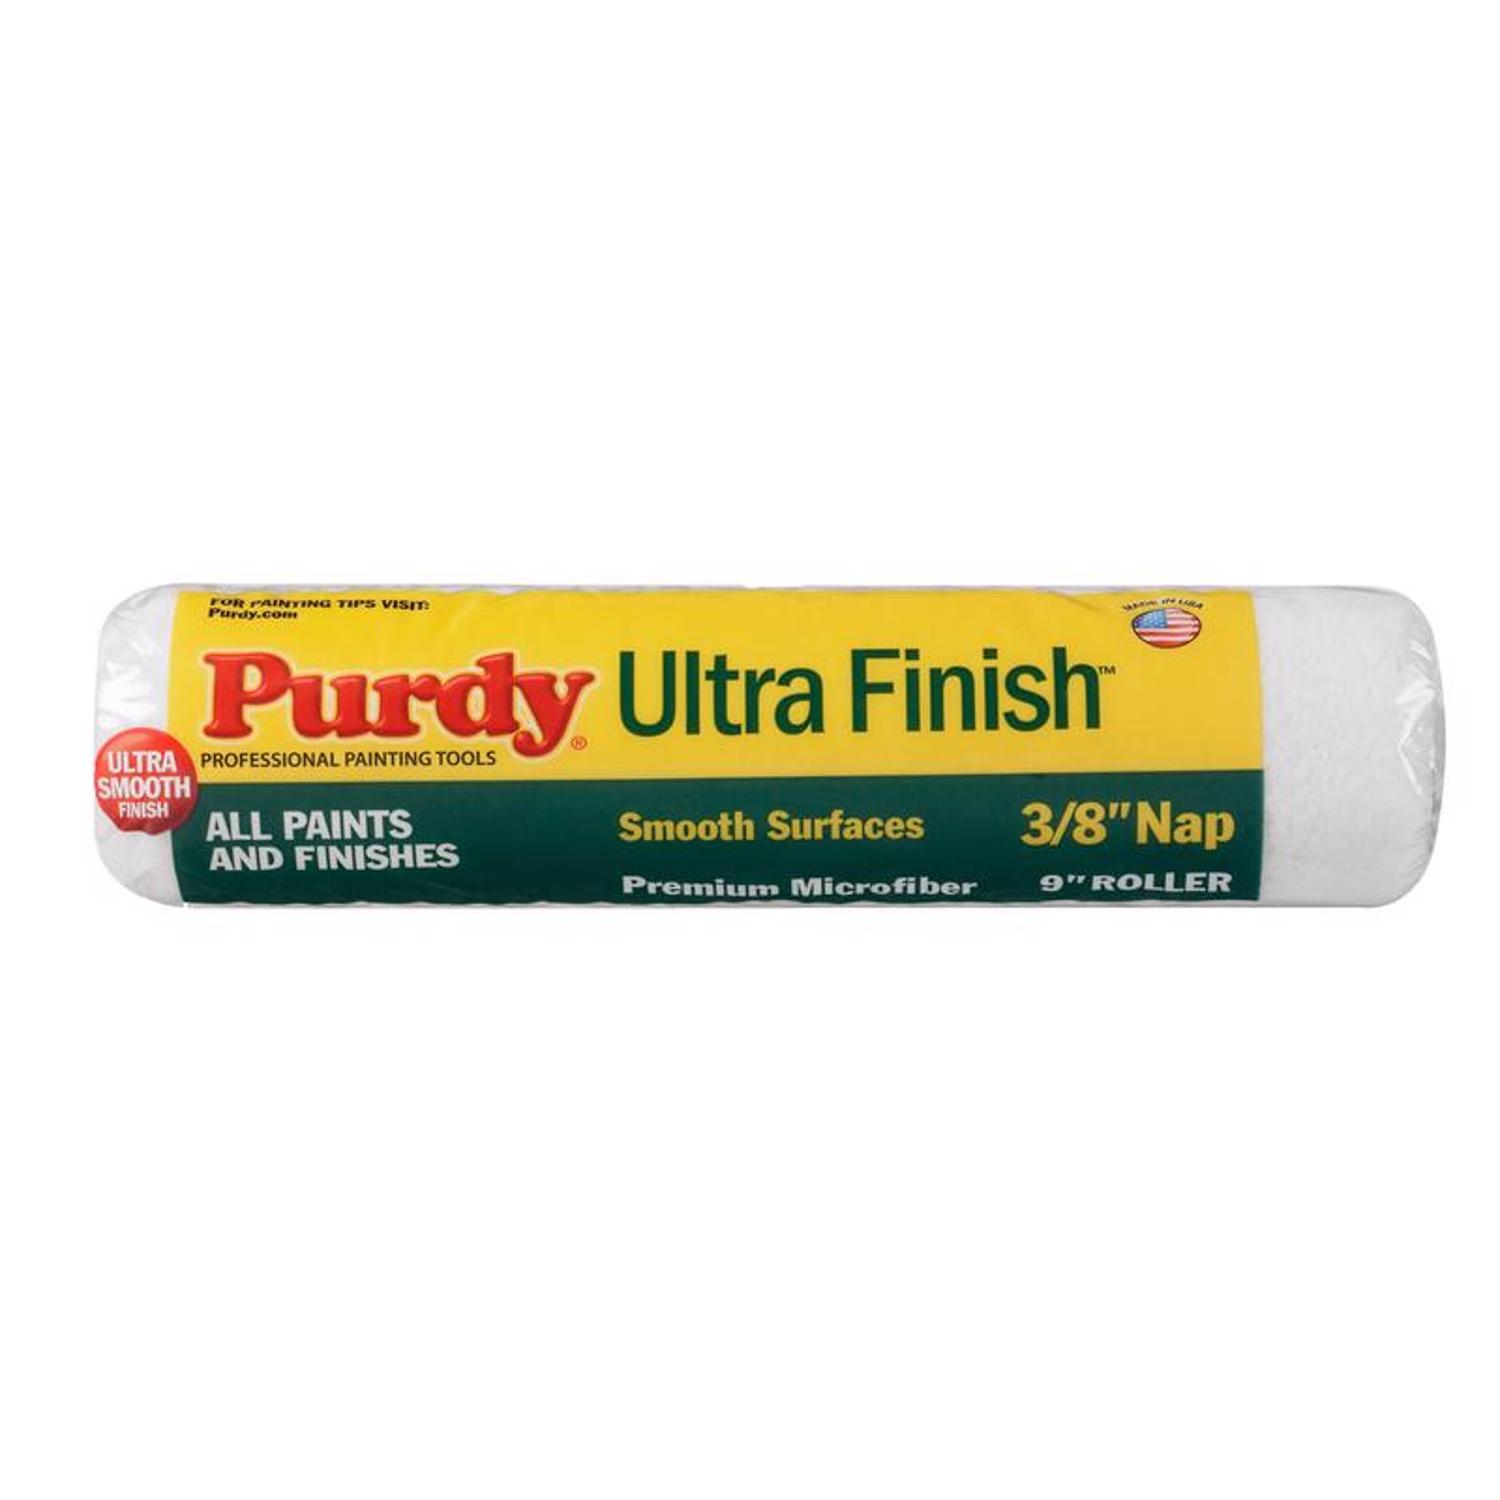 Photos - Putty Knife / Painting Tool Purdy Ultra Finish Microfiber 9 in. W X 3/8 in. Regular Paint Roller Cover